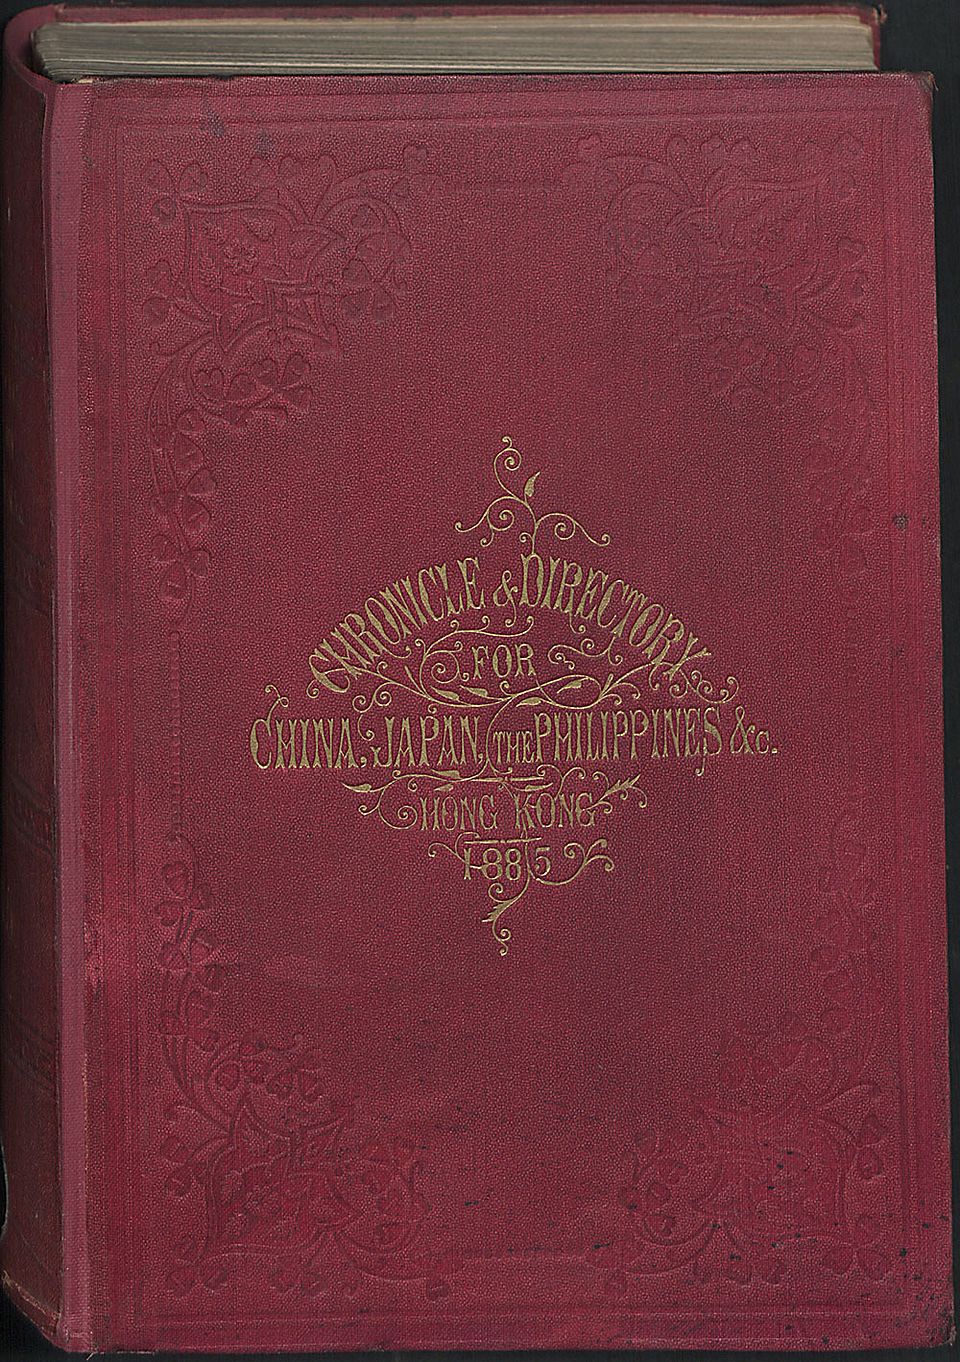 Cover of the Directory and Chronicle